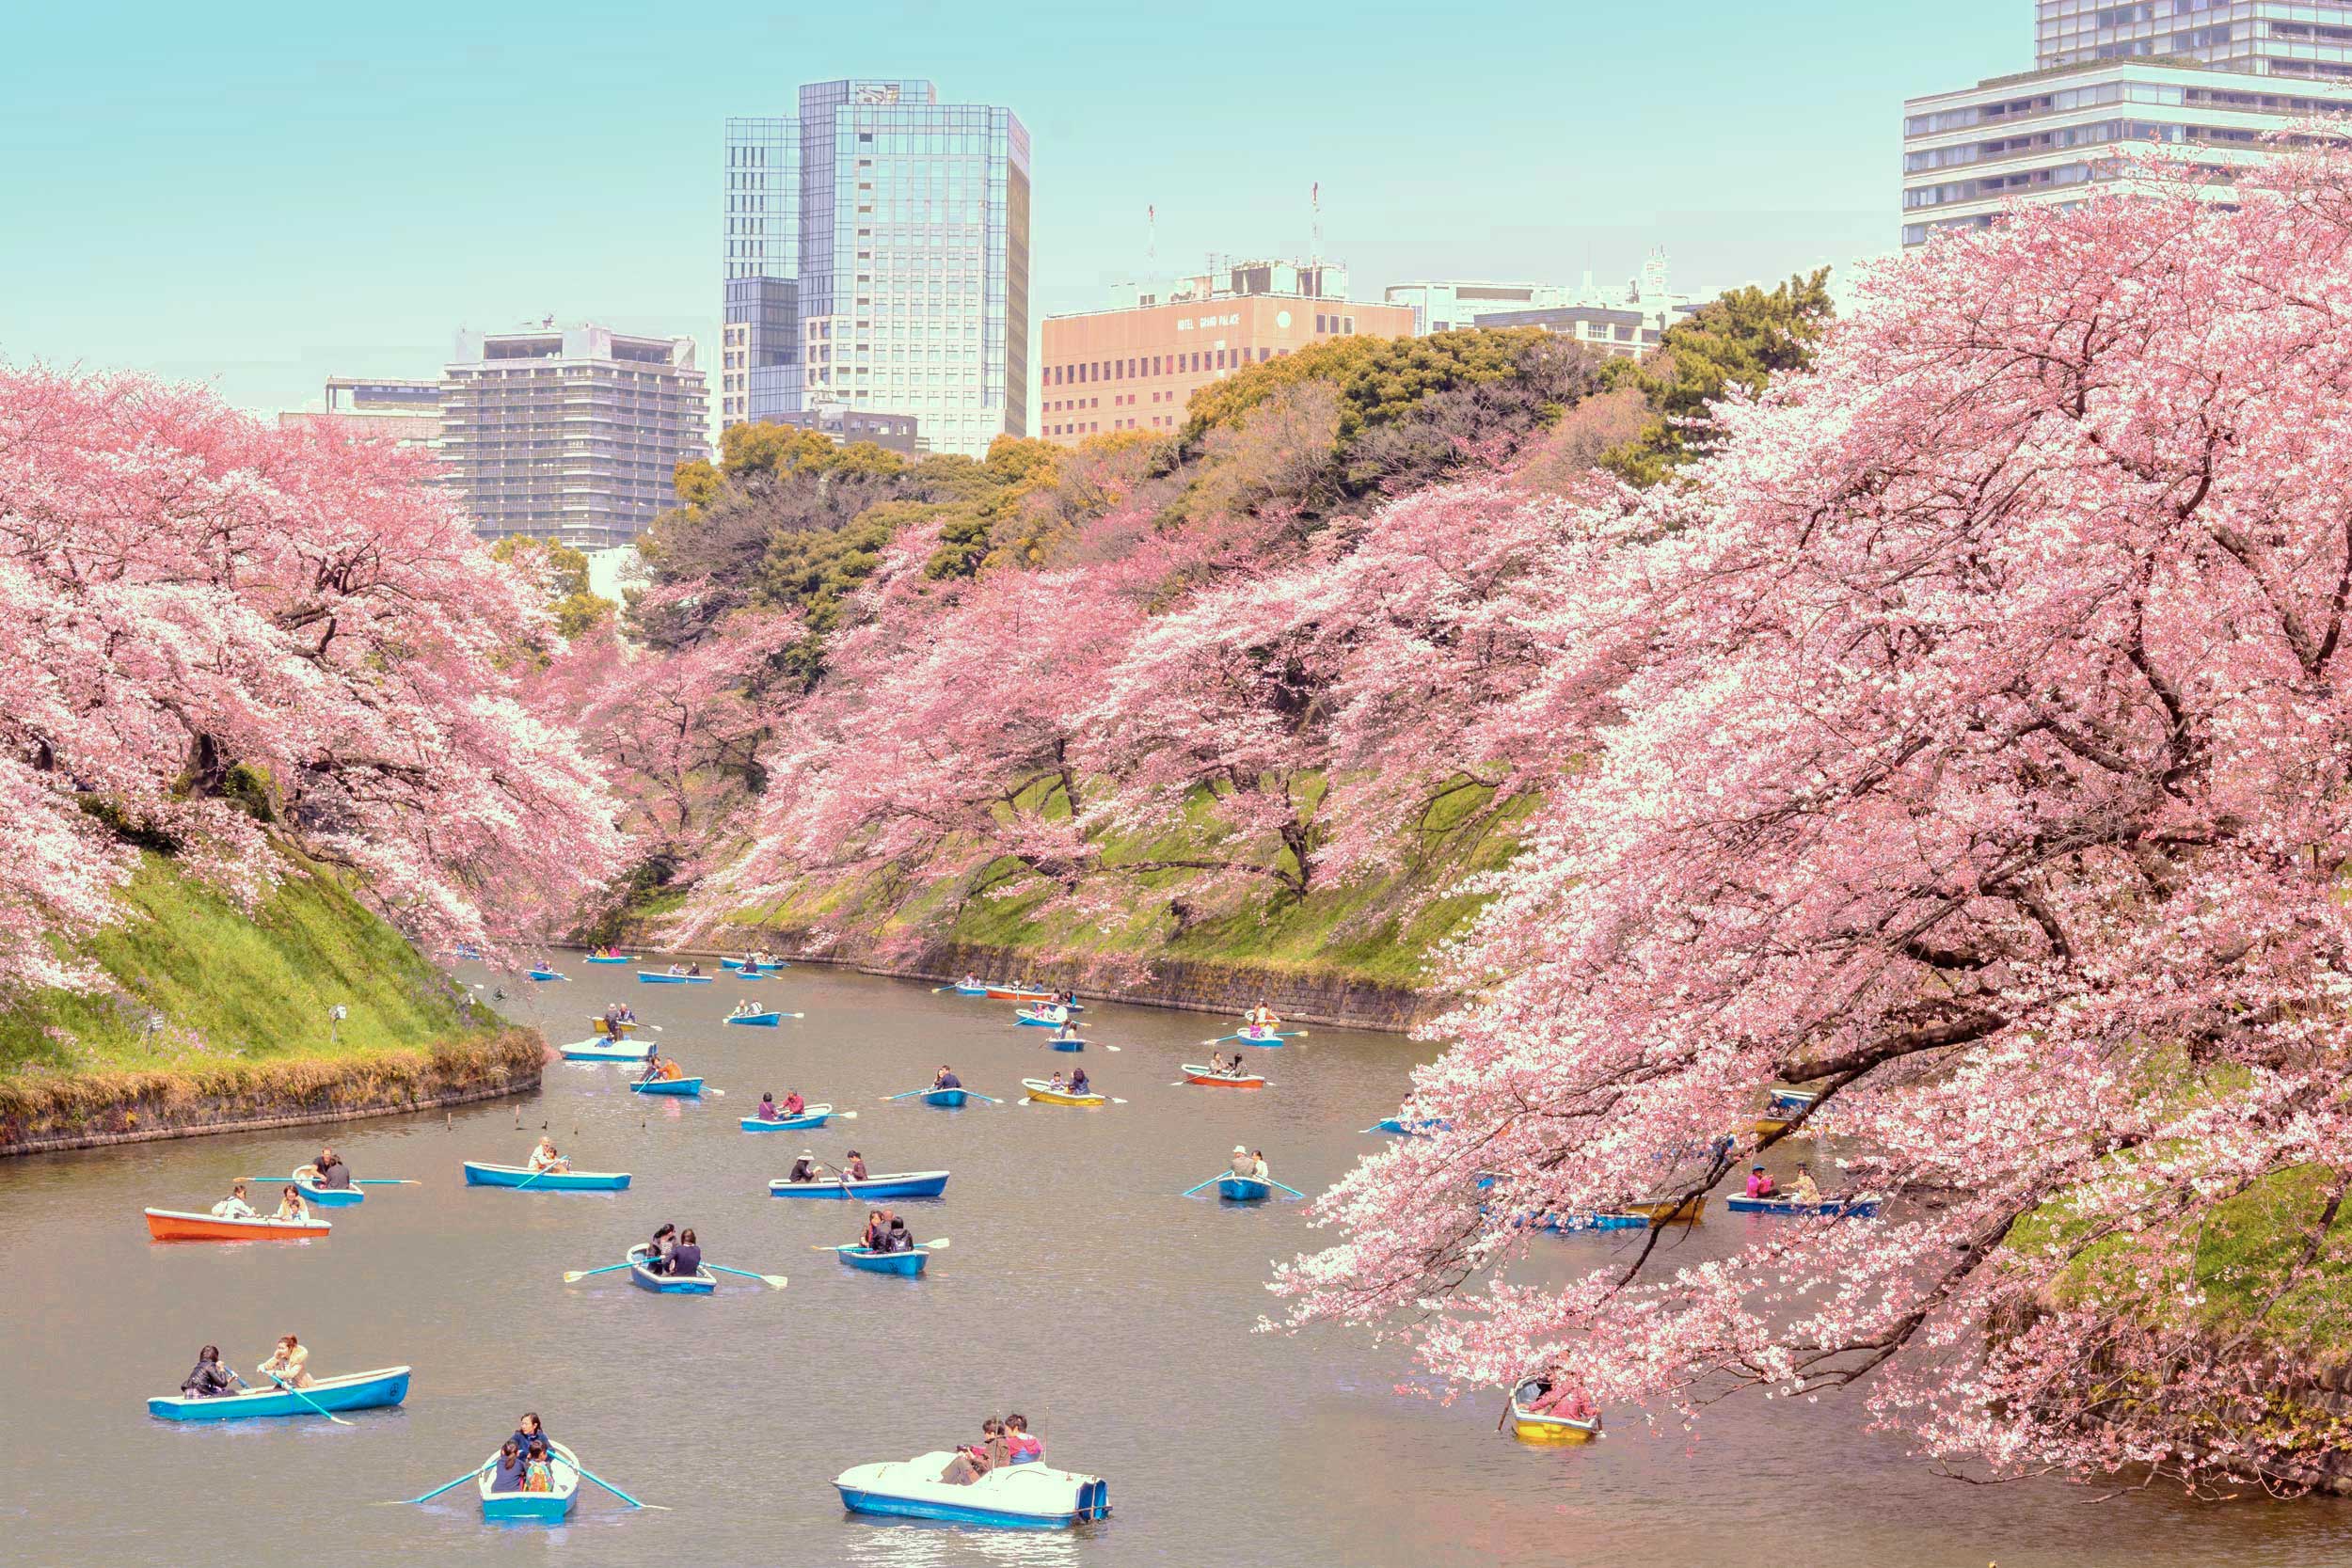 Pink peach blossom trees line the banks of a river with several people boating on it, Tokyo